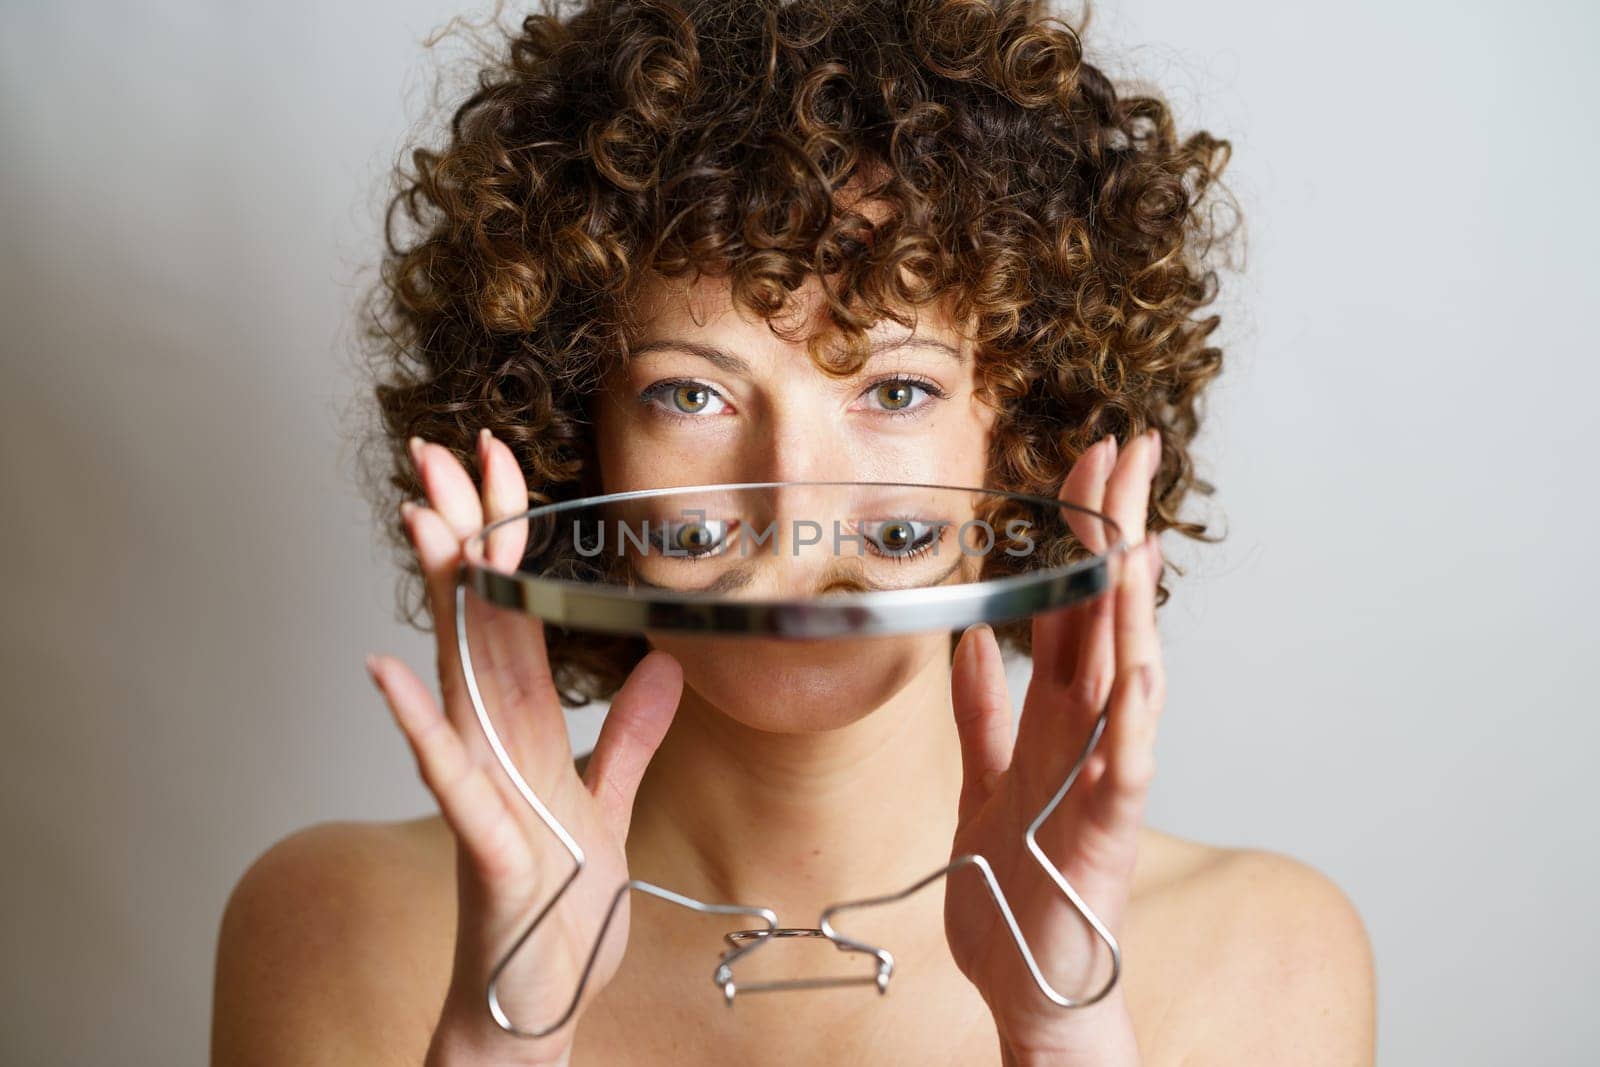 Attractive young curly haired female model holding round mirror in hands with reflection of face and eyes while looking at camera against gray background